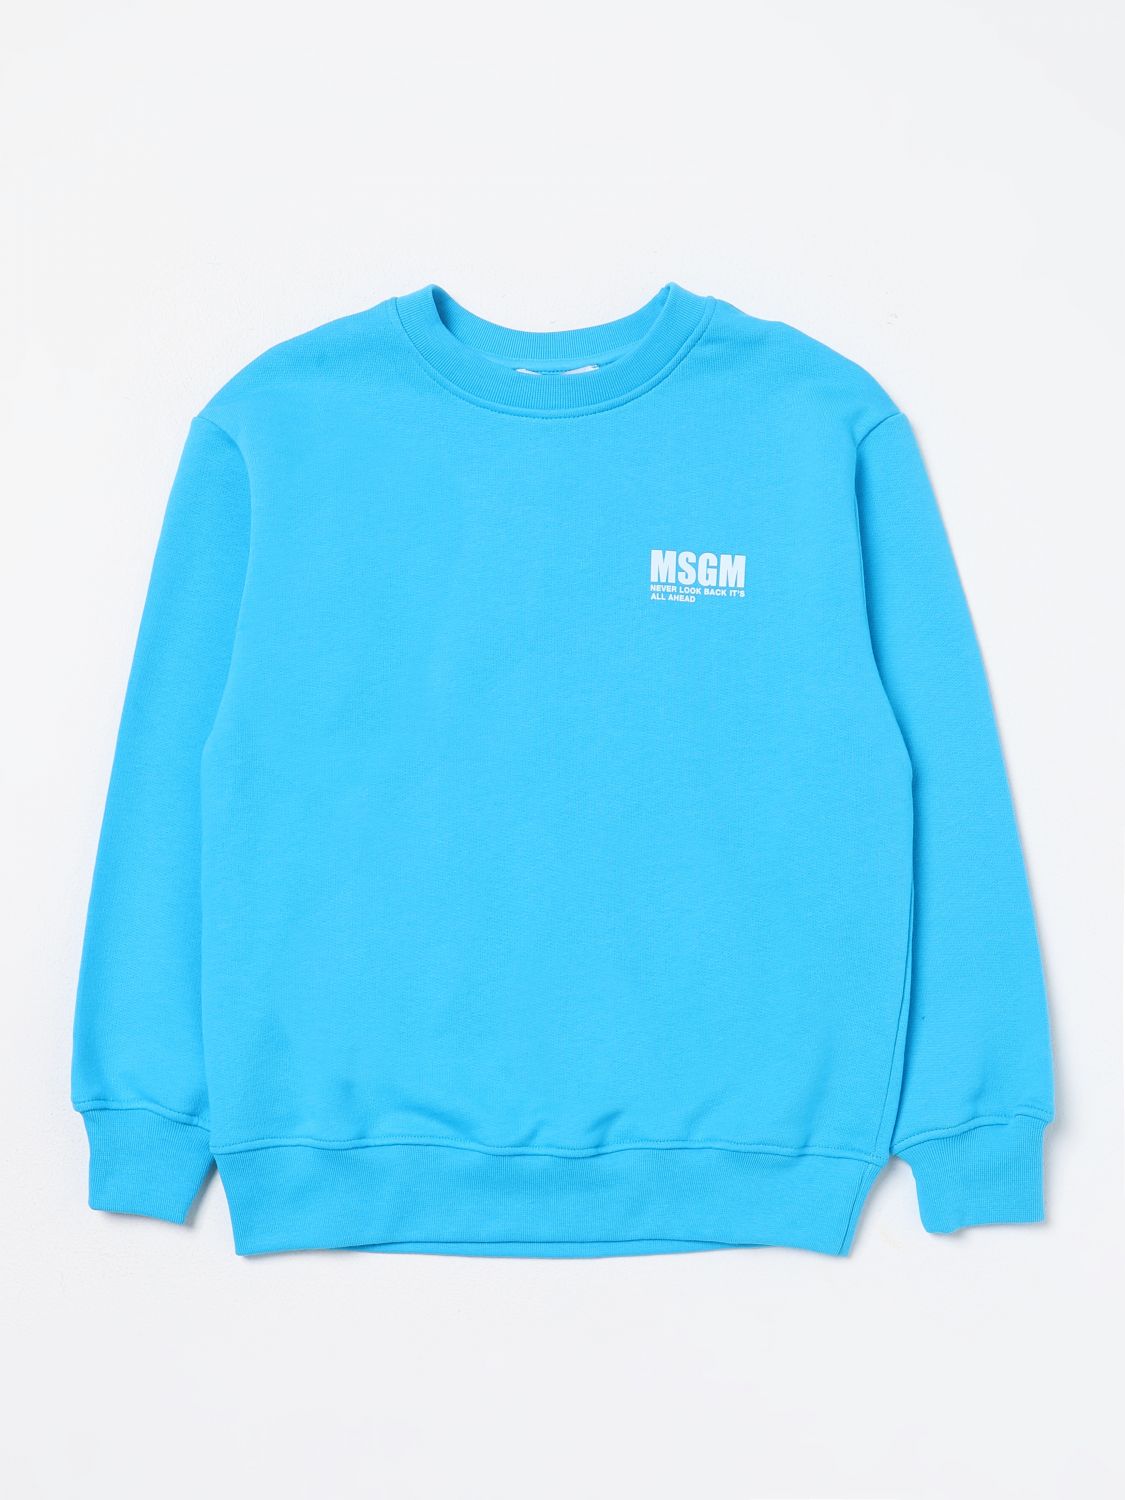 Msgm Sweater  Kids Kids Color Turquoise